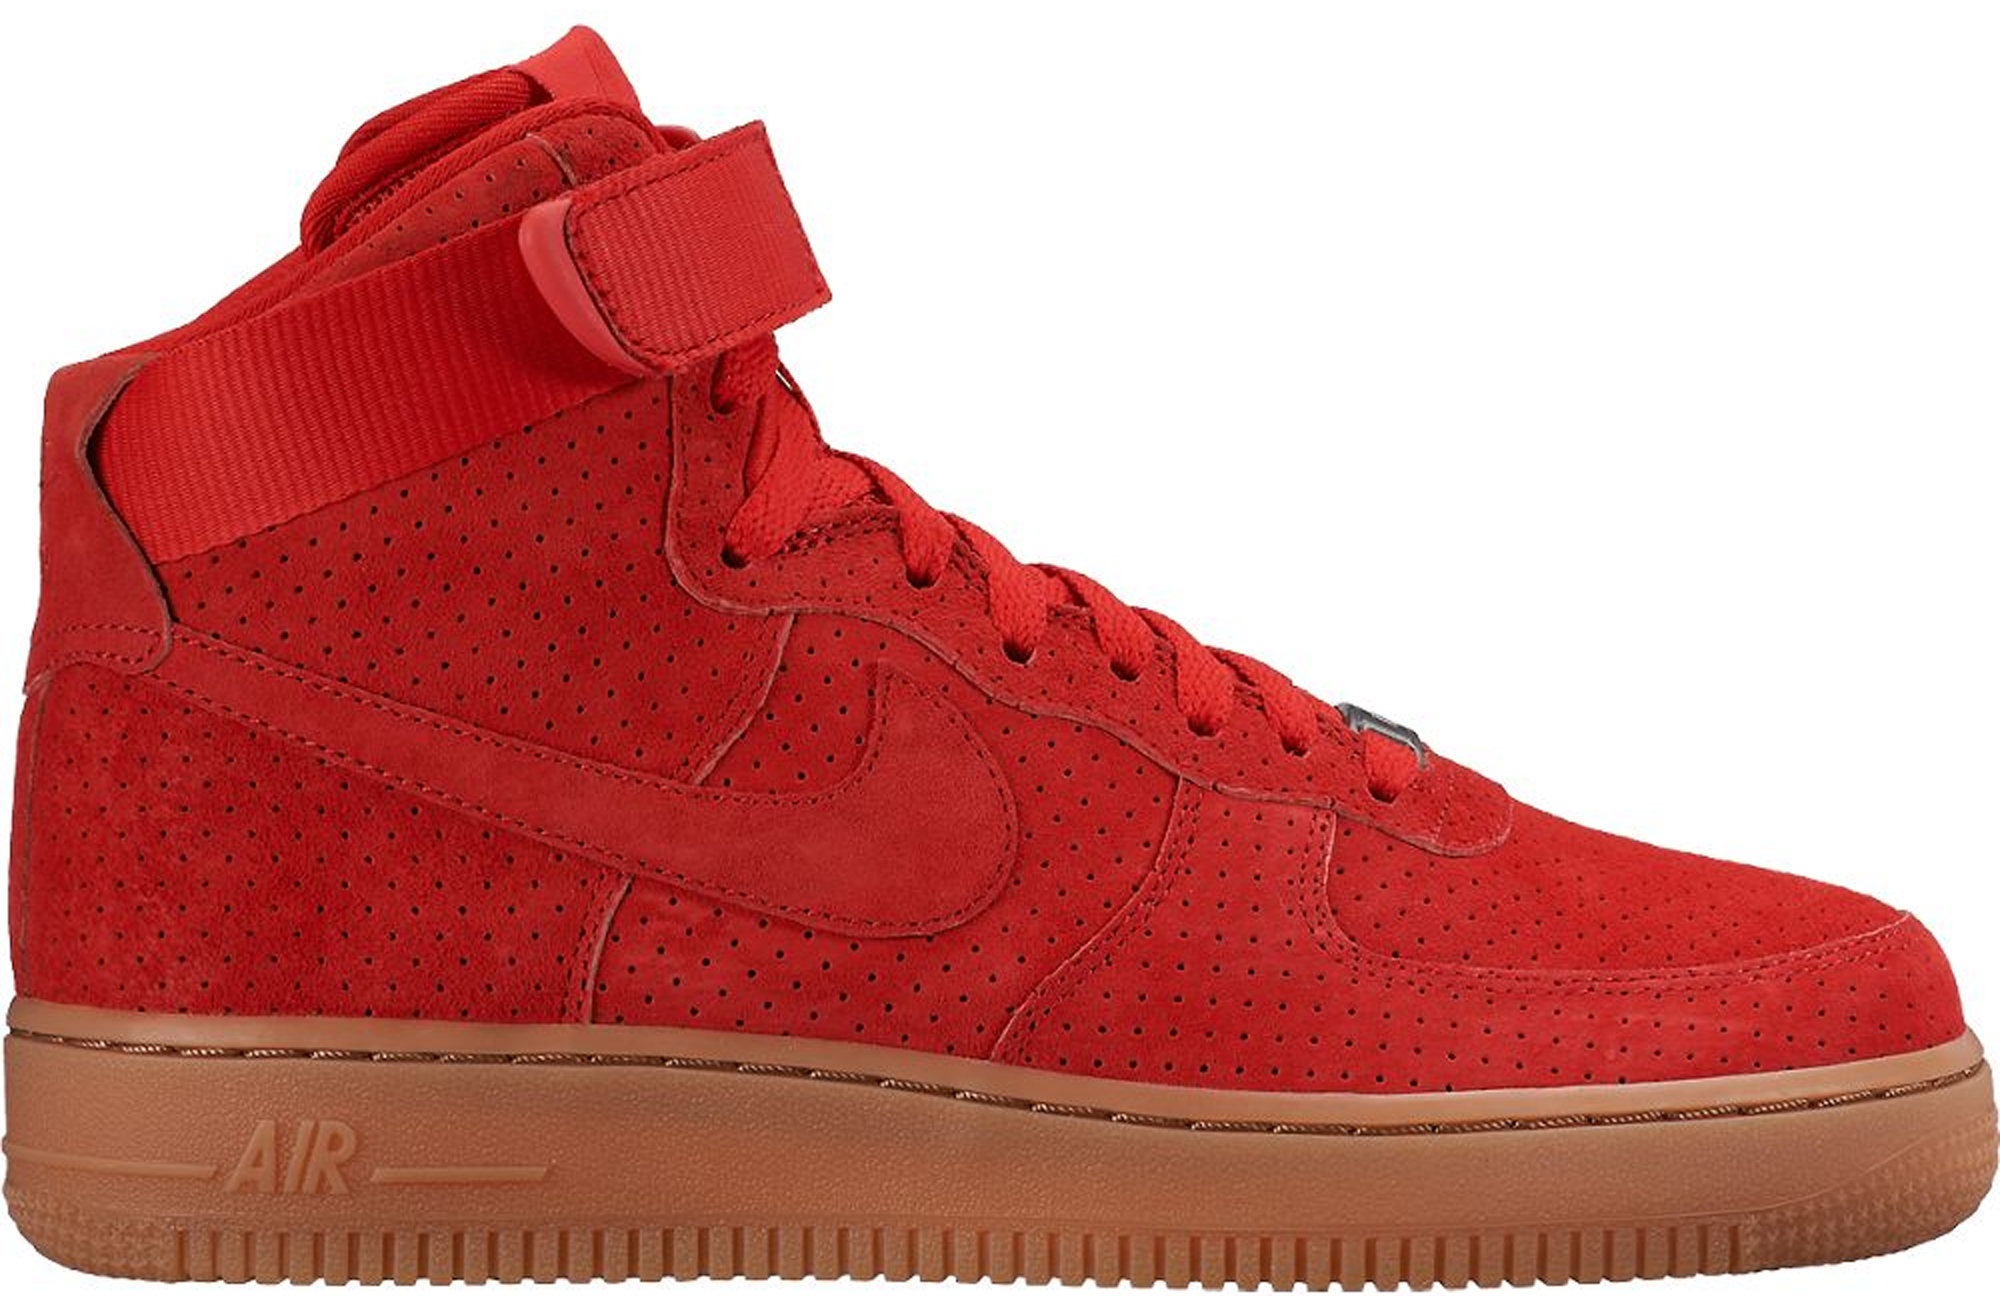 Nike Air Force 1 High Suede University Red Gum (W) - 749266-601